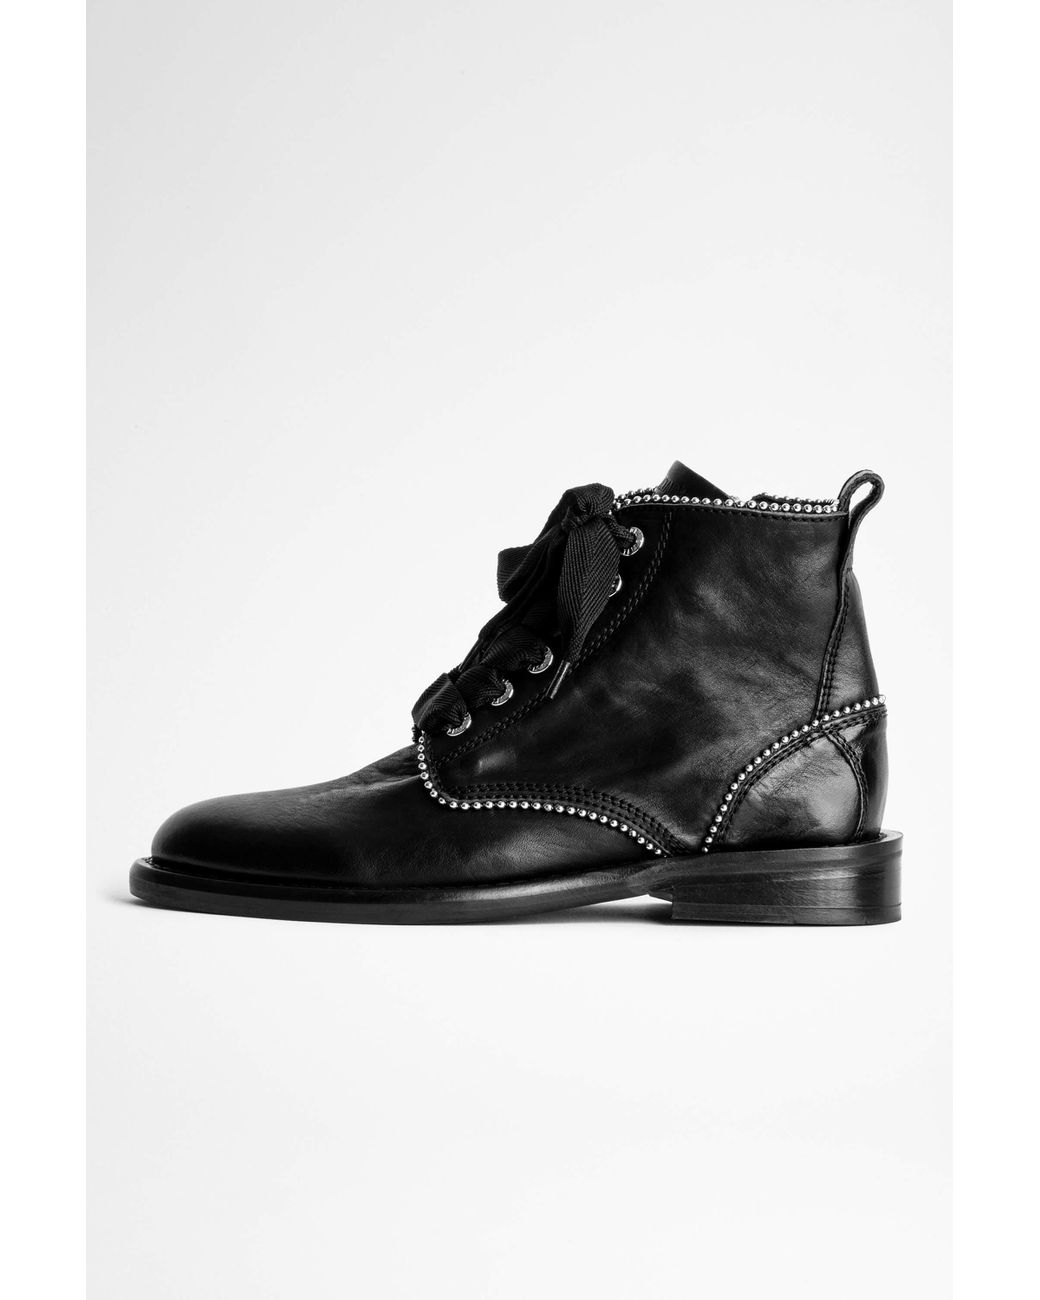 Zadig & Voltaire Laureen Roma Studs Ankle Boots in Black - Lyst